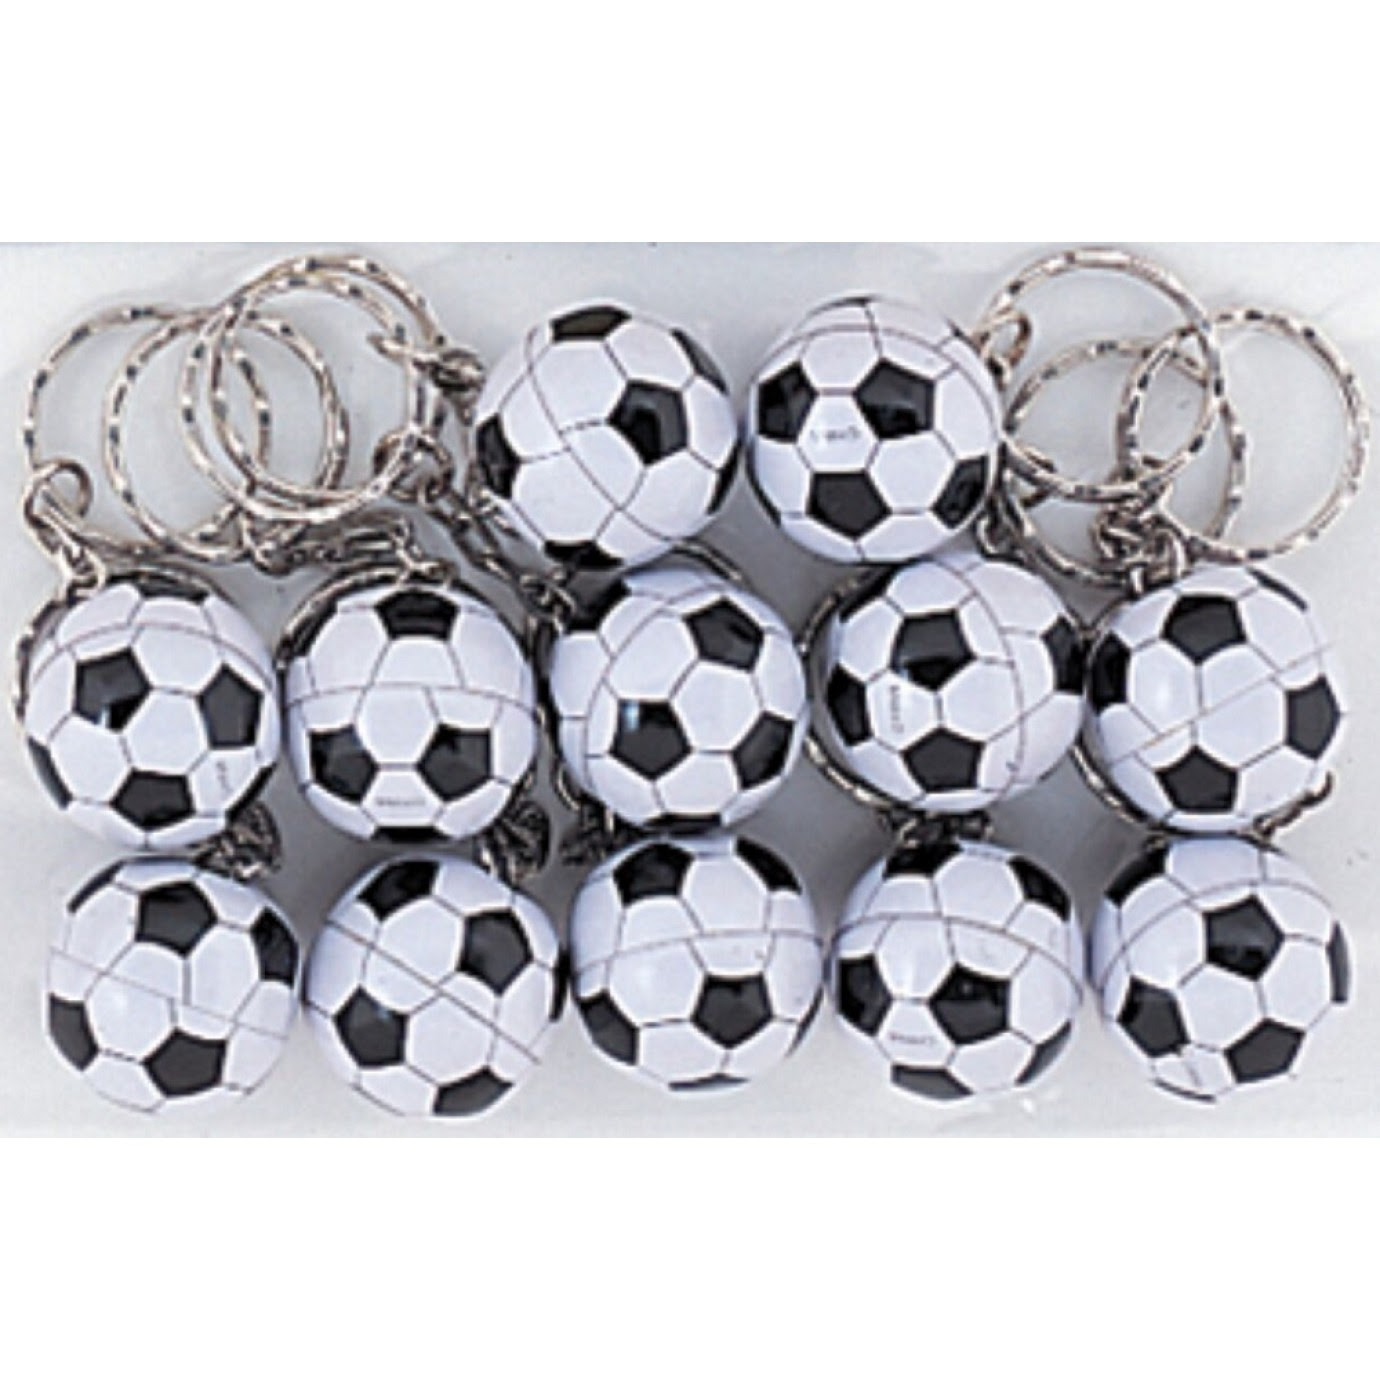 2020 popular 1 trends in sports & entertainment, toys & hobbies, men's clothing, home & garden with soccer ball team and 1. Key Chains Soccer Balls 12 Pk Favours Small Toys Party Favours Novelties Games Party Supplies The Party People Shop